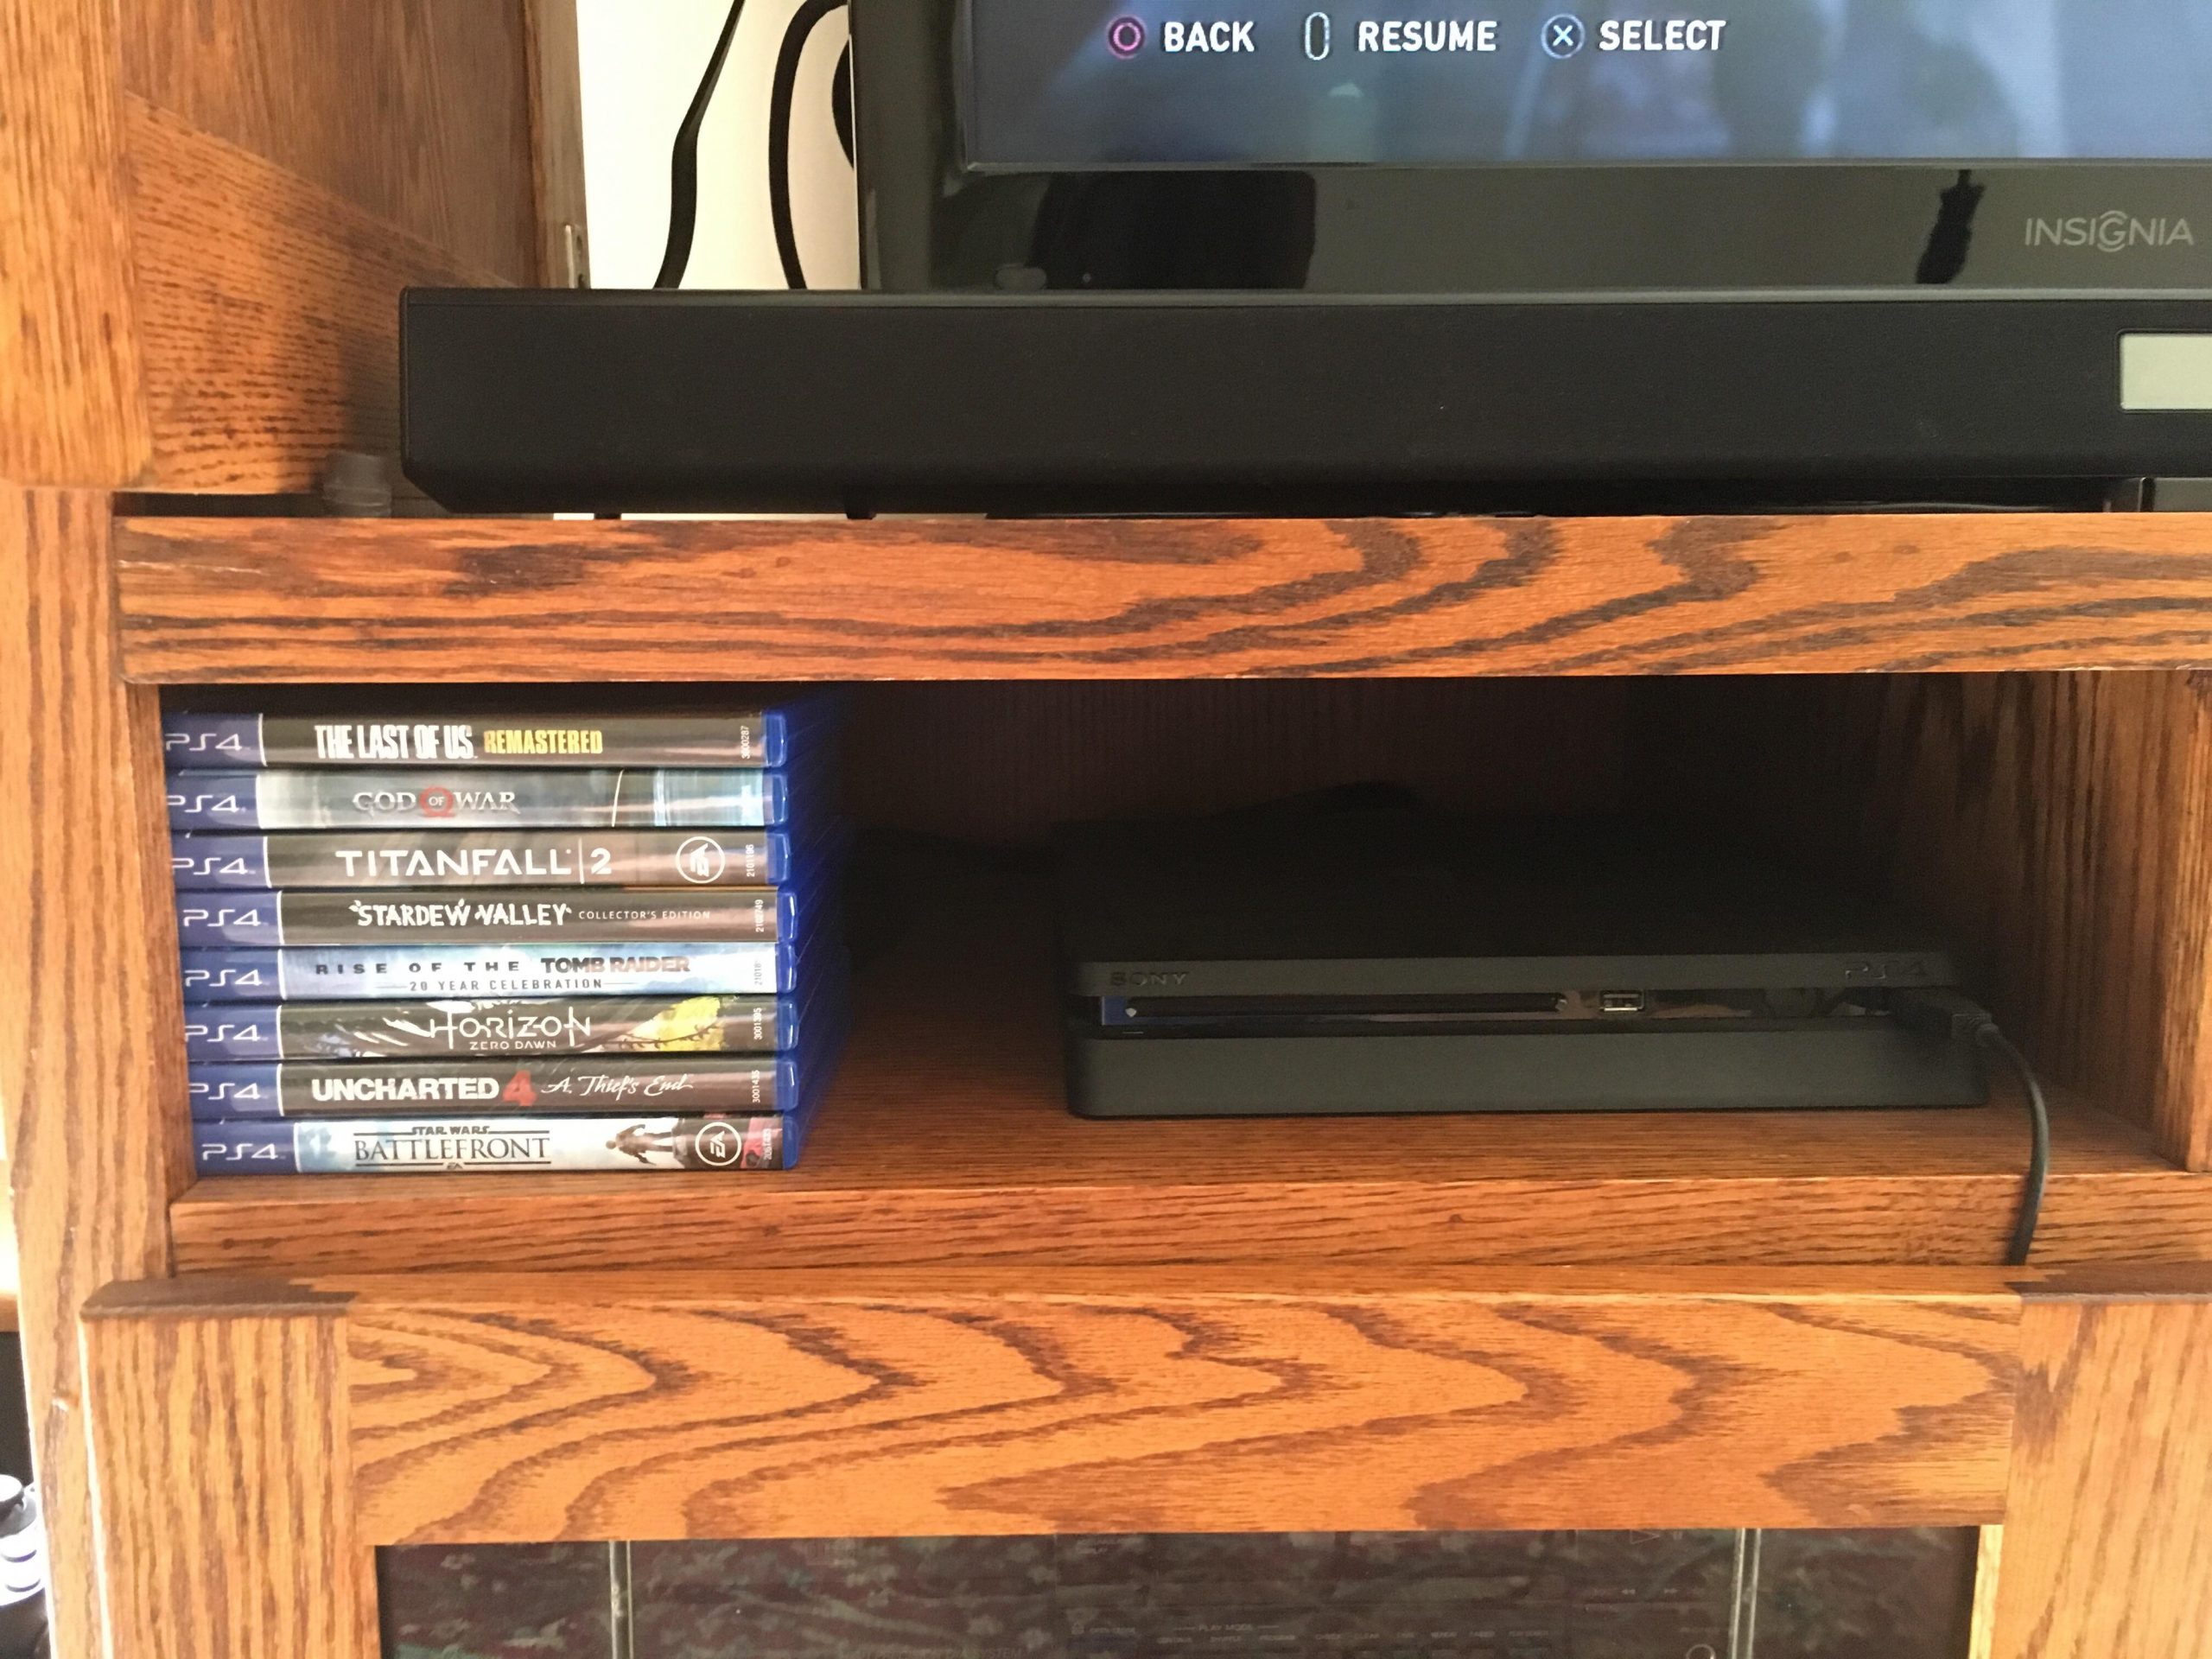 Should I move my PS4 out of this area, will keeping it ...